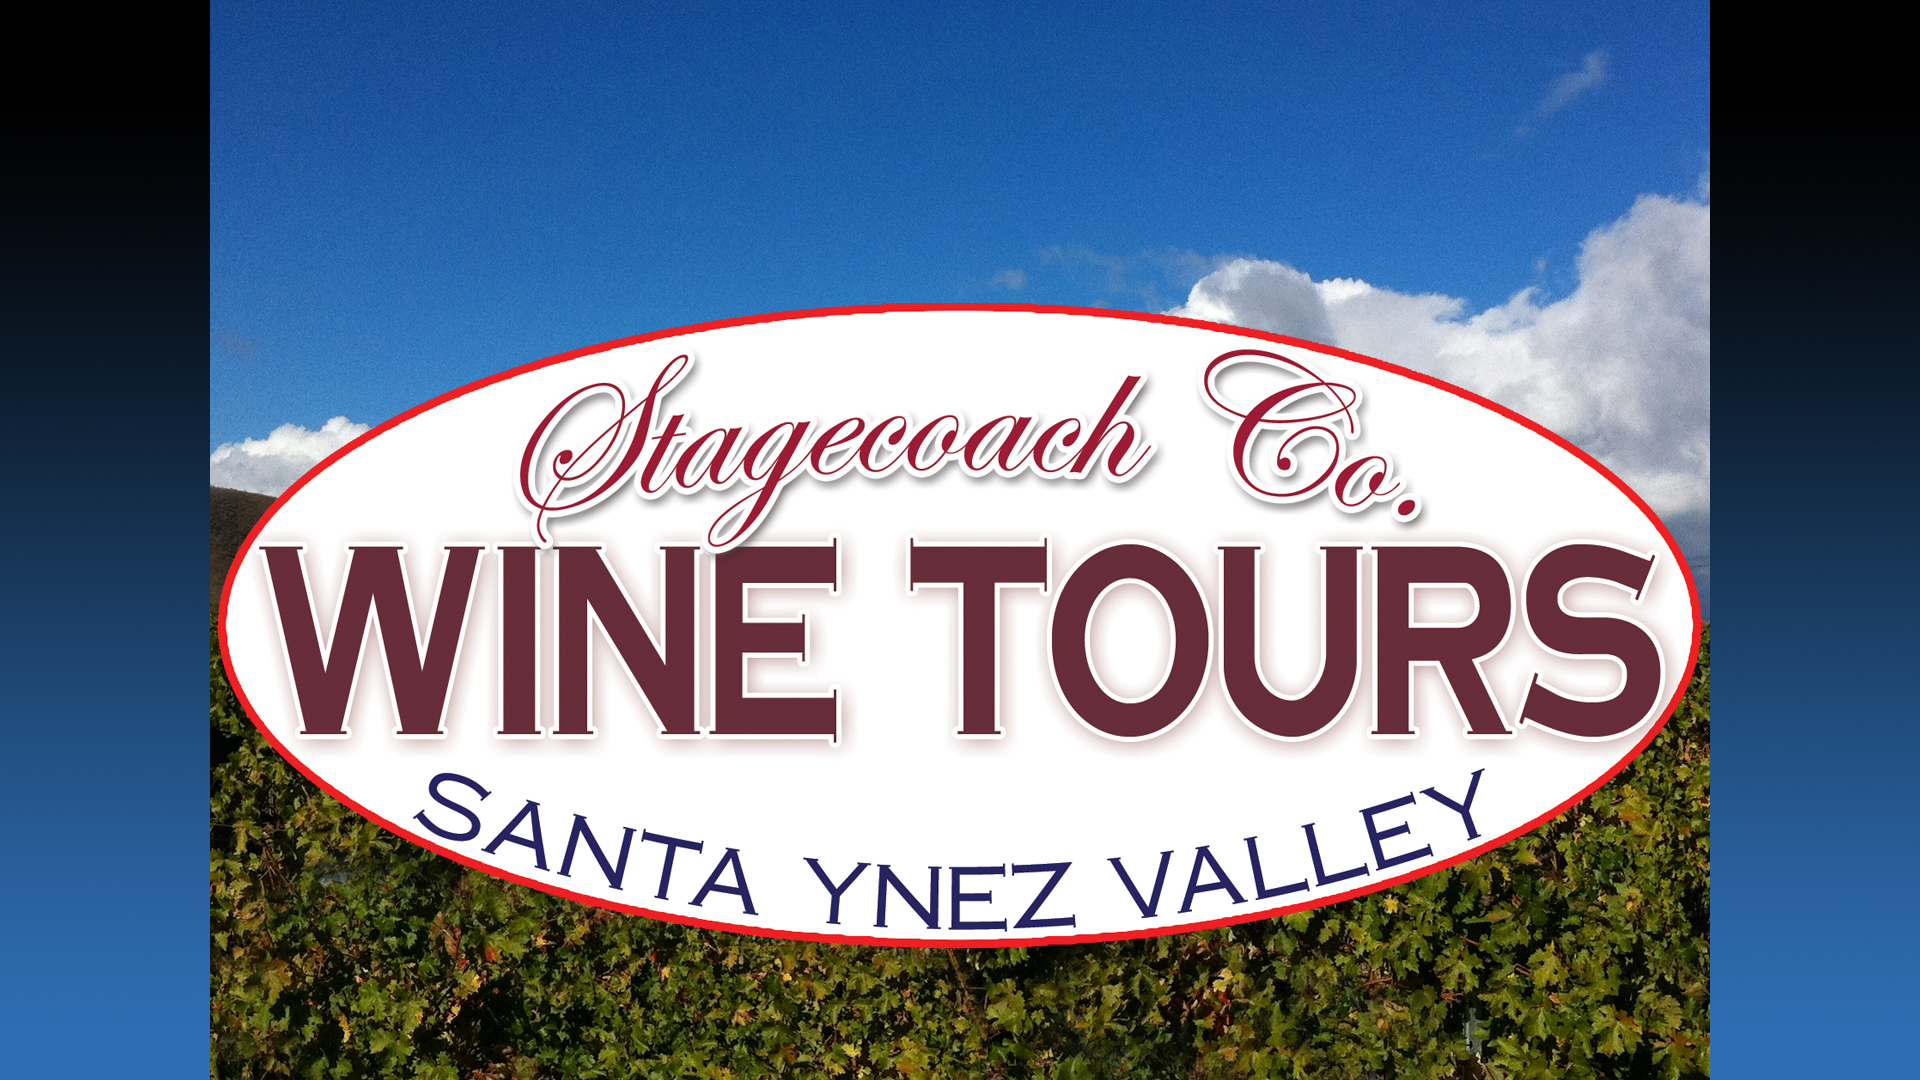 Stagecoach Co Wine Tours